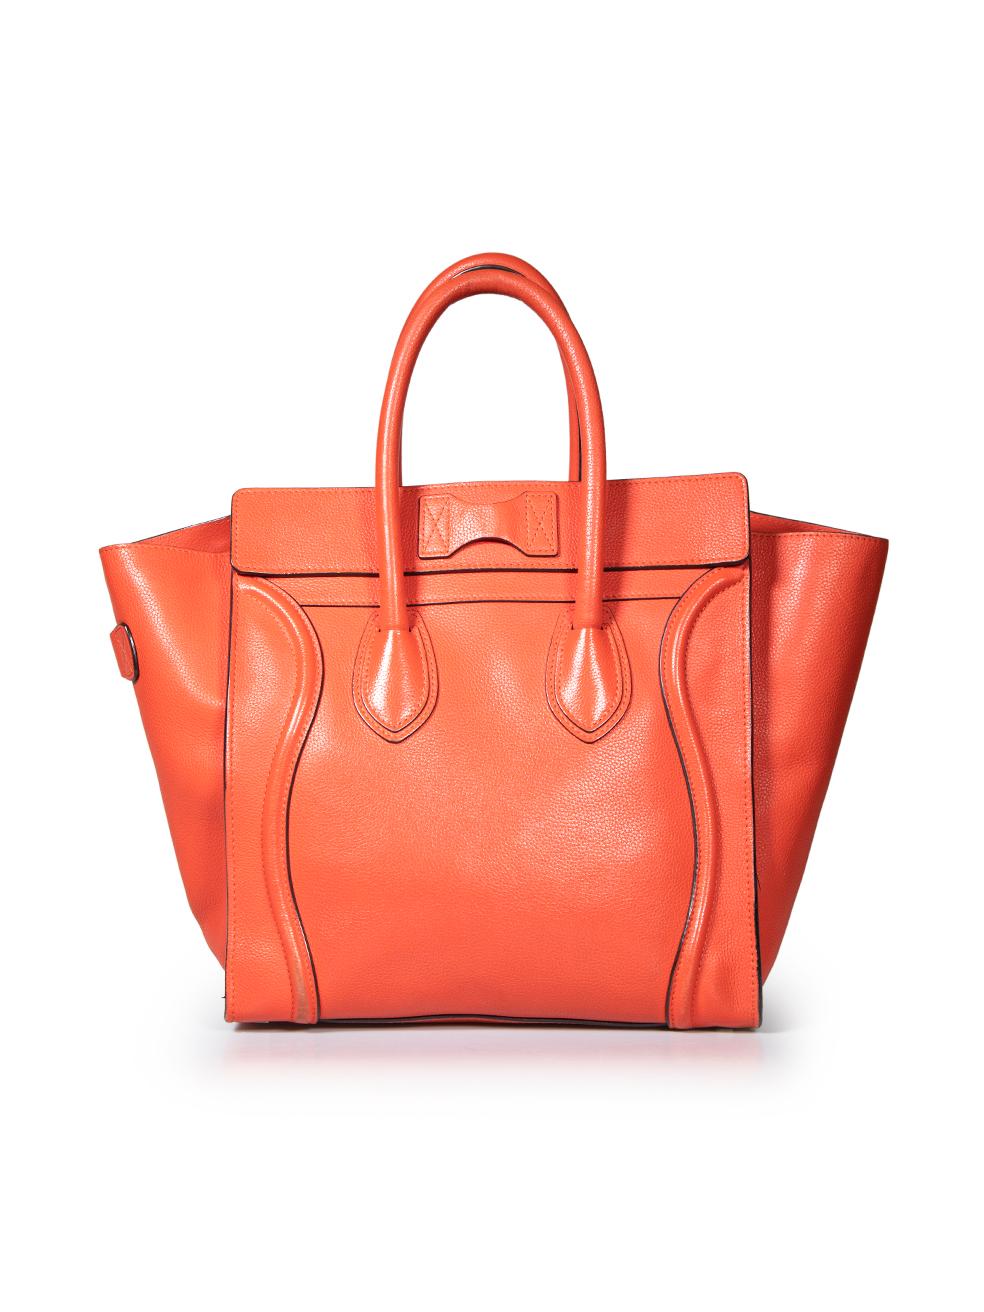 Celine Red Leather Micro Luggage Tote In Good Condition For Sale In London, GB